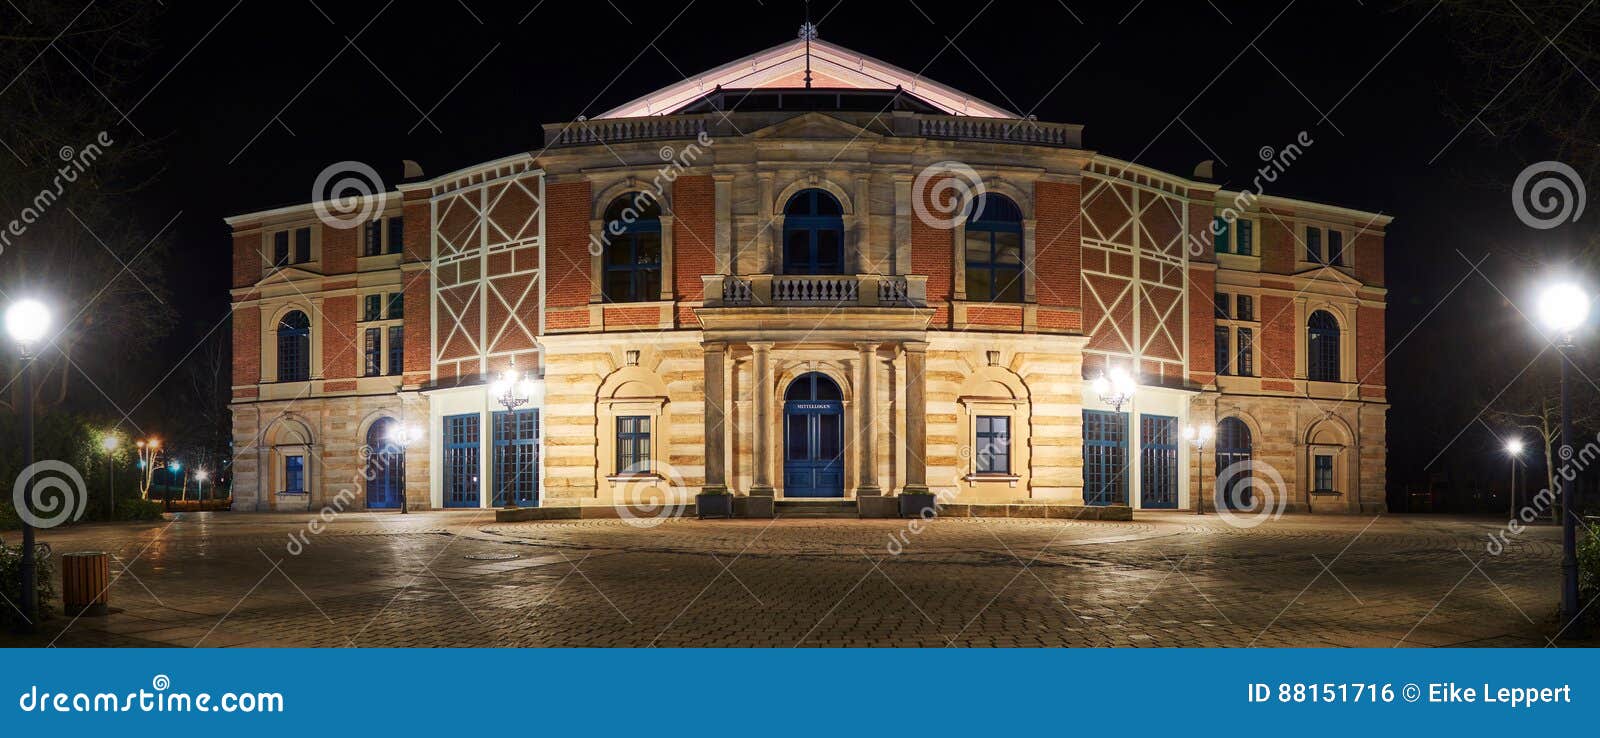 bayreuth wagner festival theatre